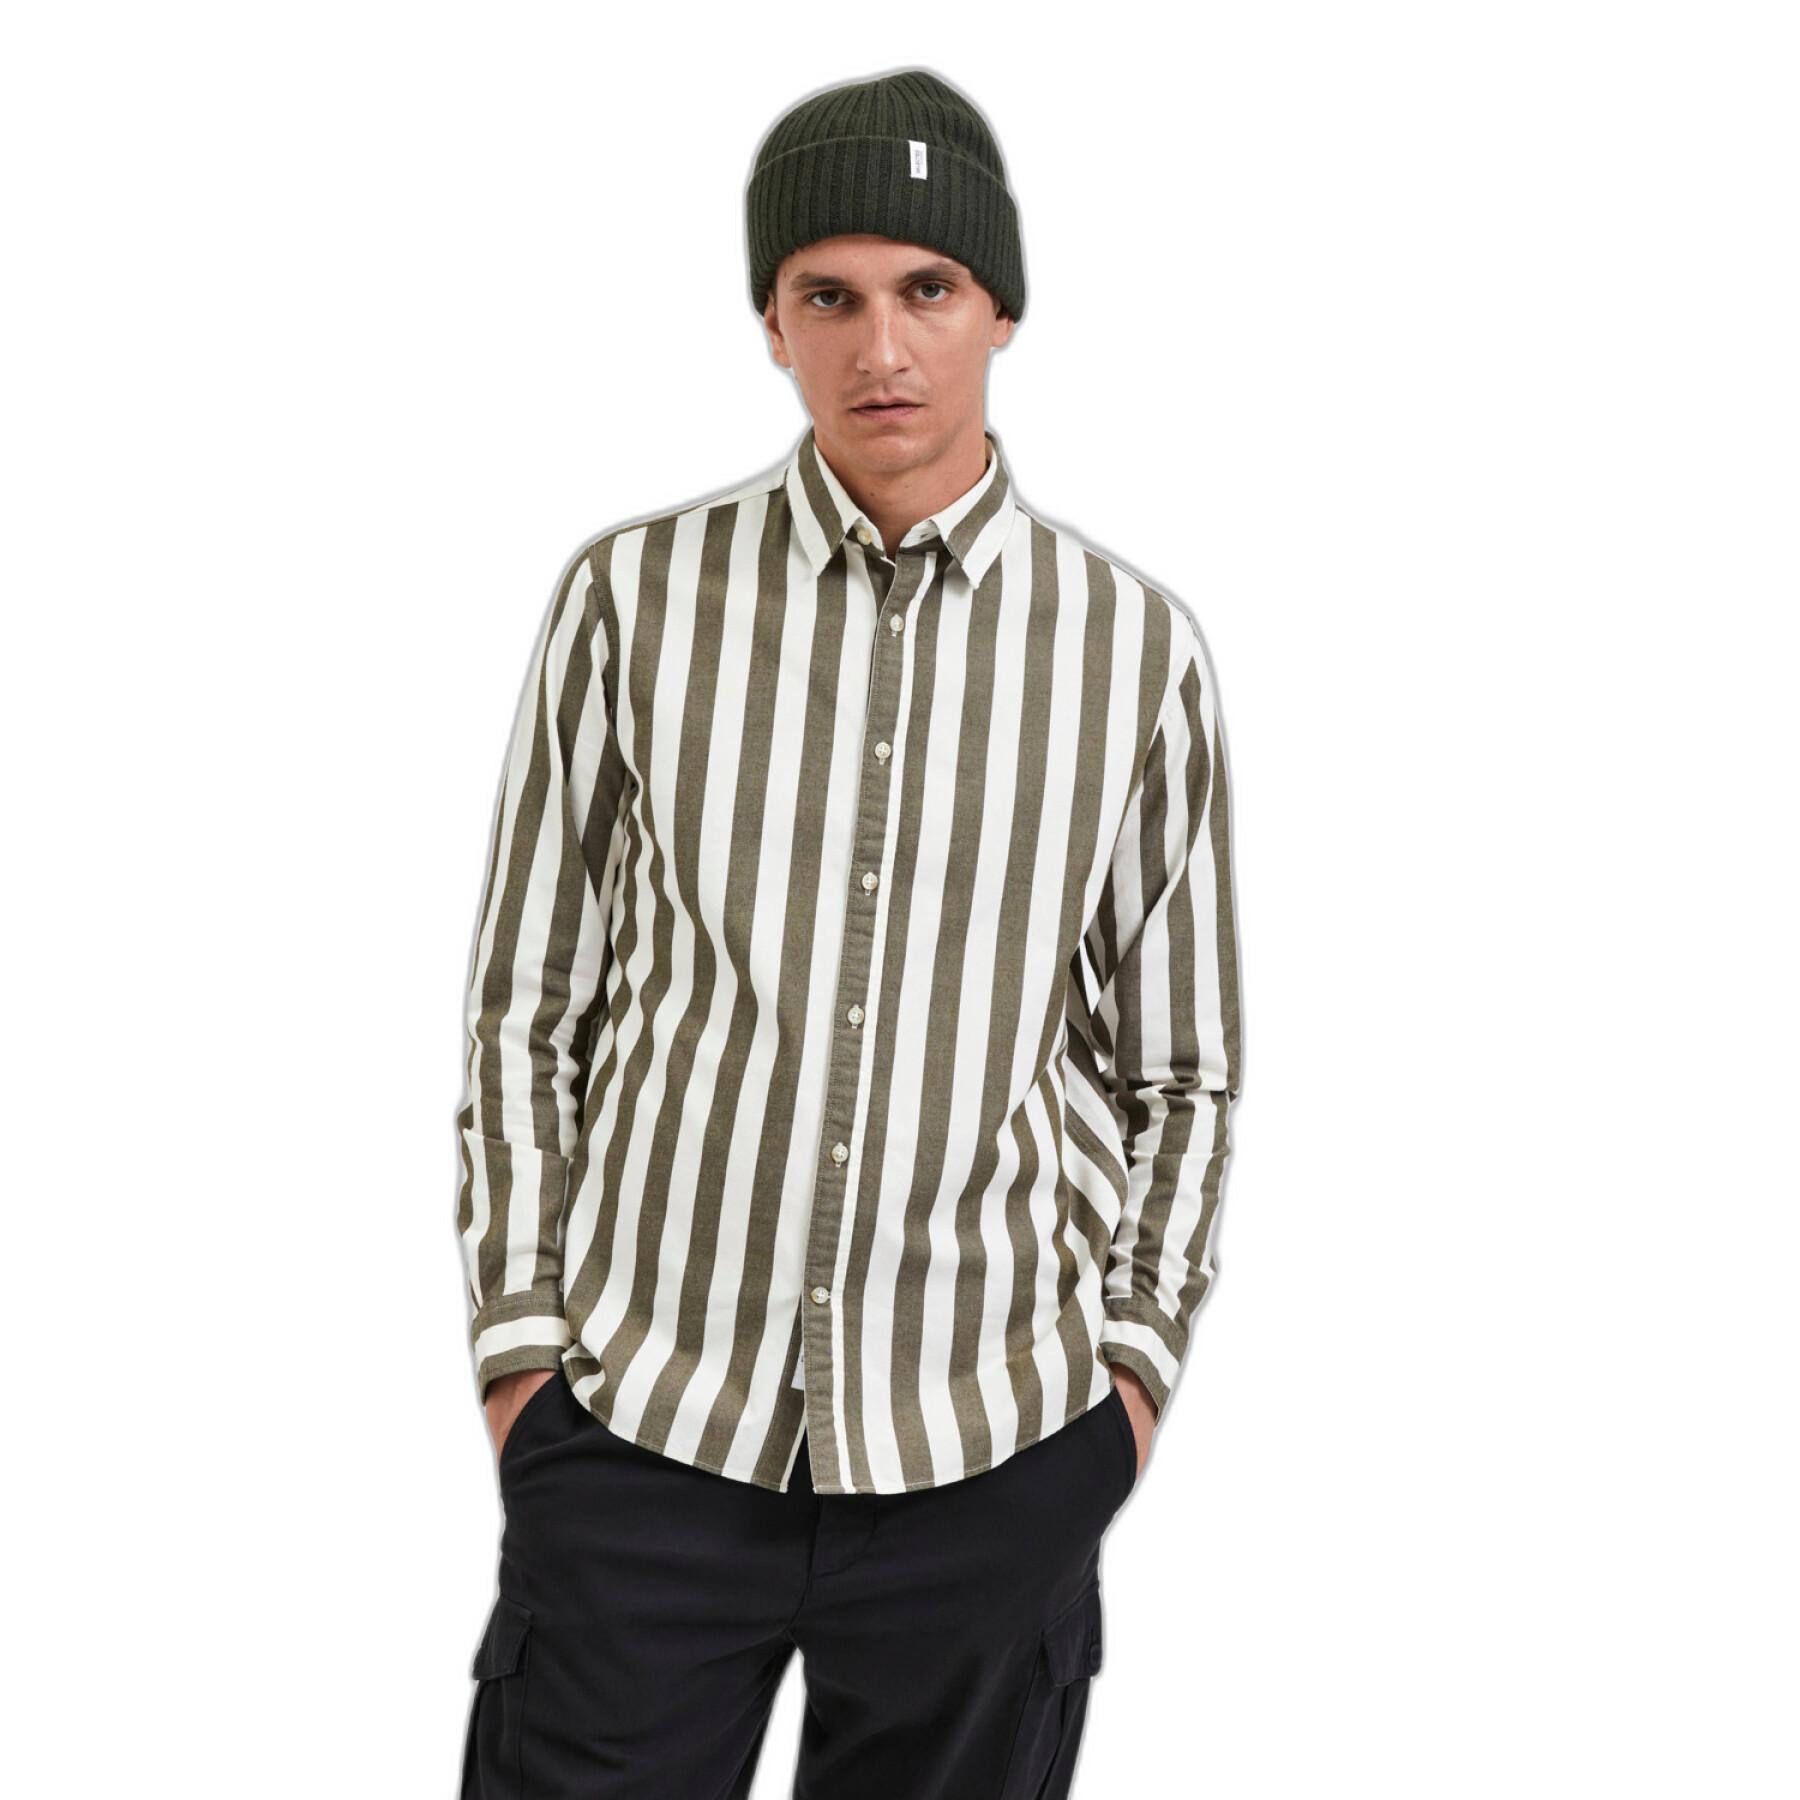 Camicia Selected Slhregpecko Stripes W